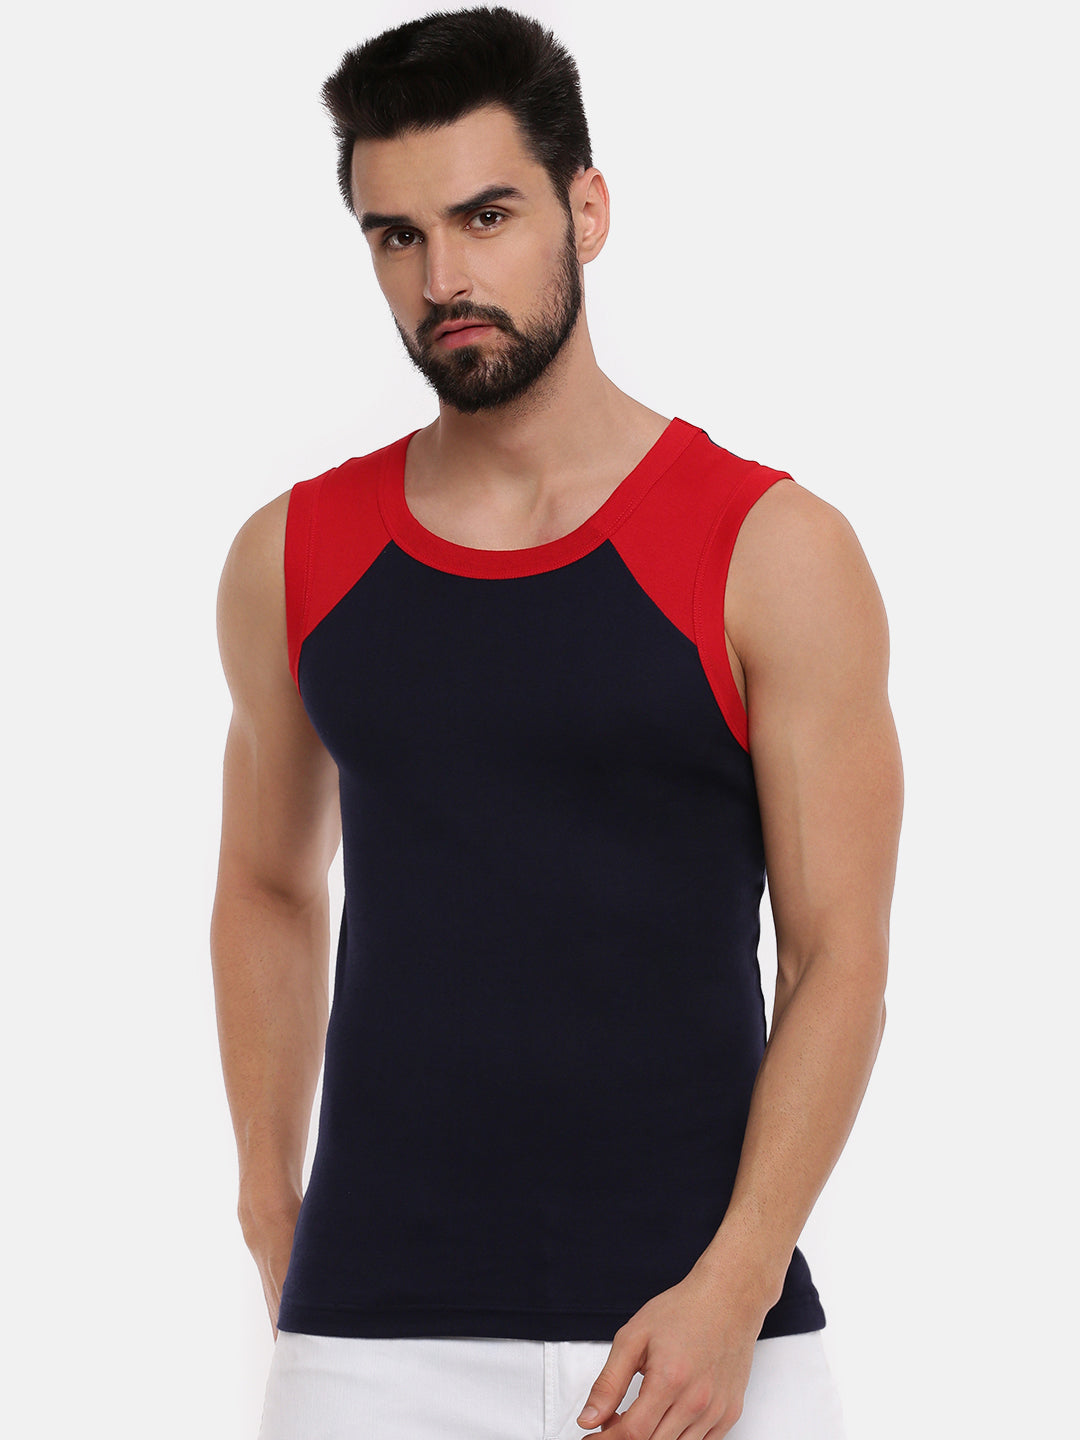 Buy RAMRAJ COTTON Mens Cotton Assorted Solid Archery 5001 Vest Pack of 3  (Red_1-S) at